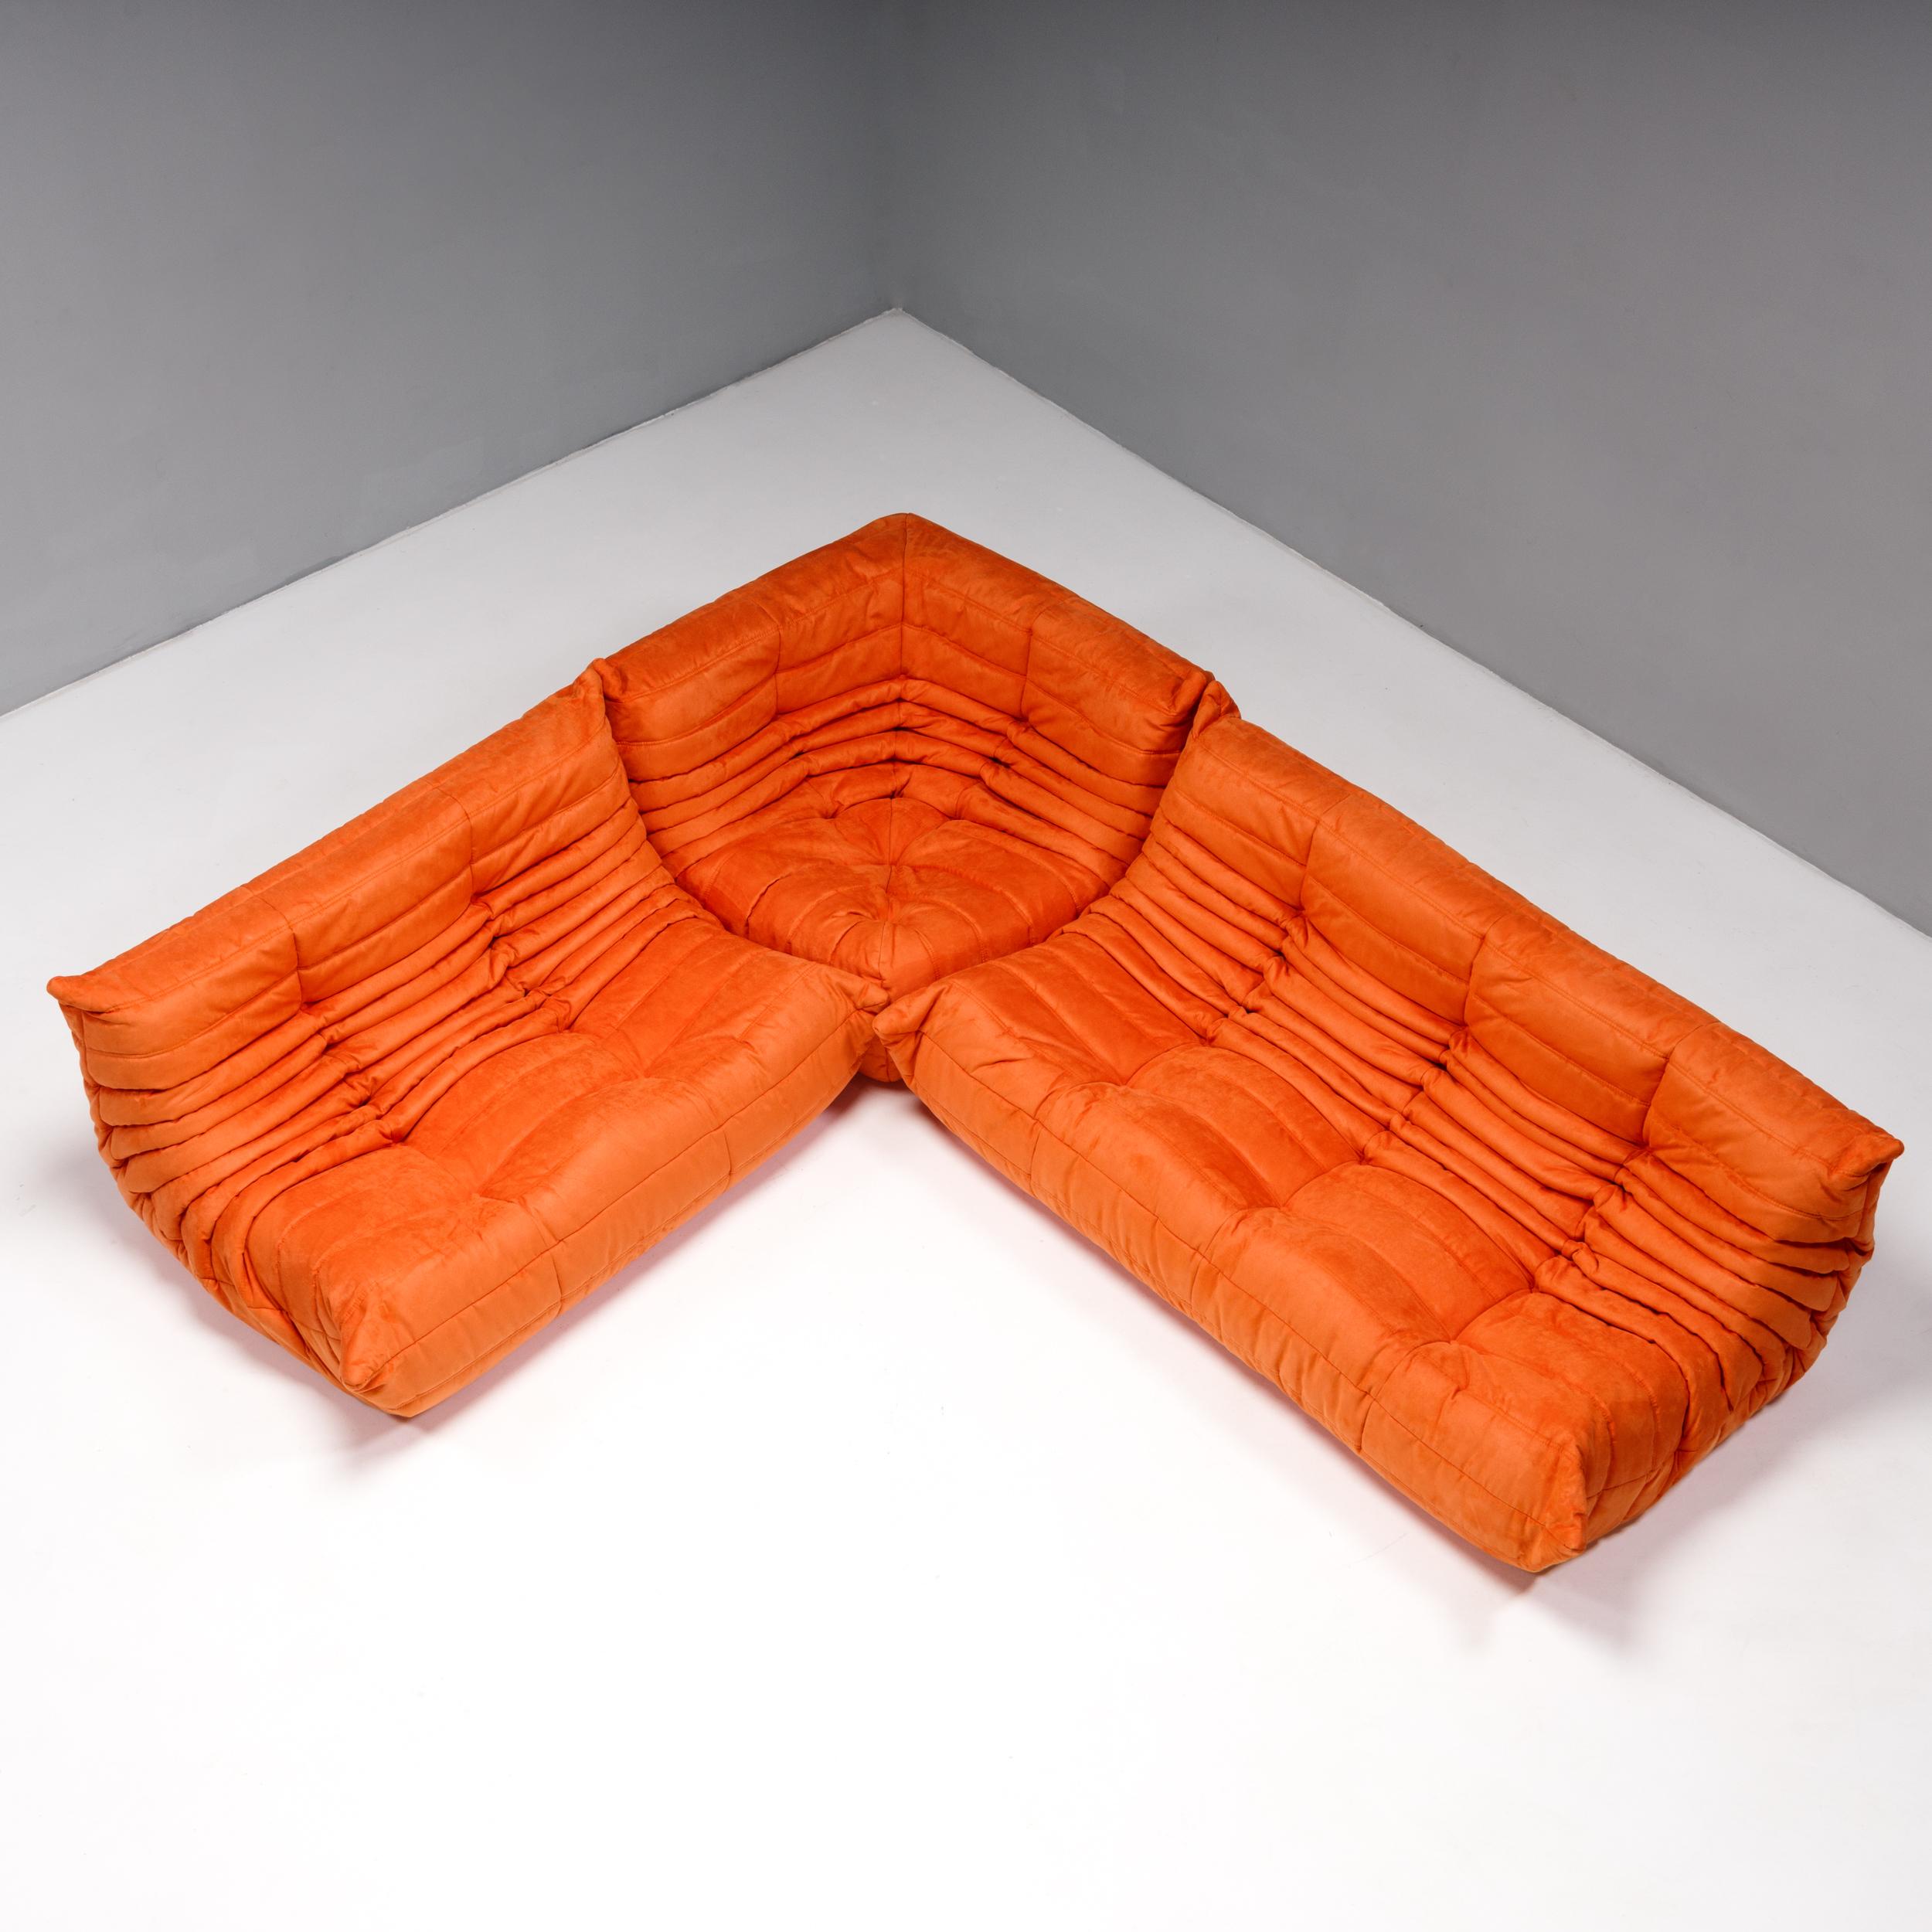 The iconic Togo orange sofa set, originally designed by Michel Ducaroy for Ligne Roset in 1973, has become a design midcentury Classic.

The sofas have been newly reupholstered in a soft bright orange coloured fabric. Made completely from foam, with